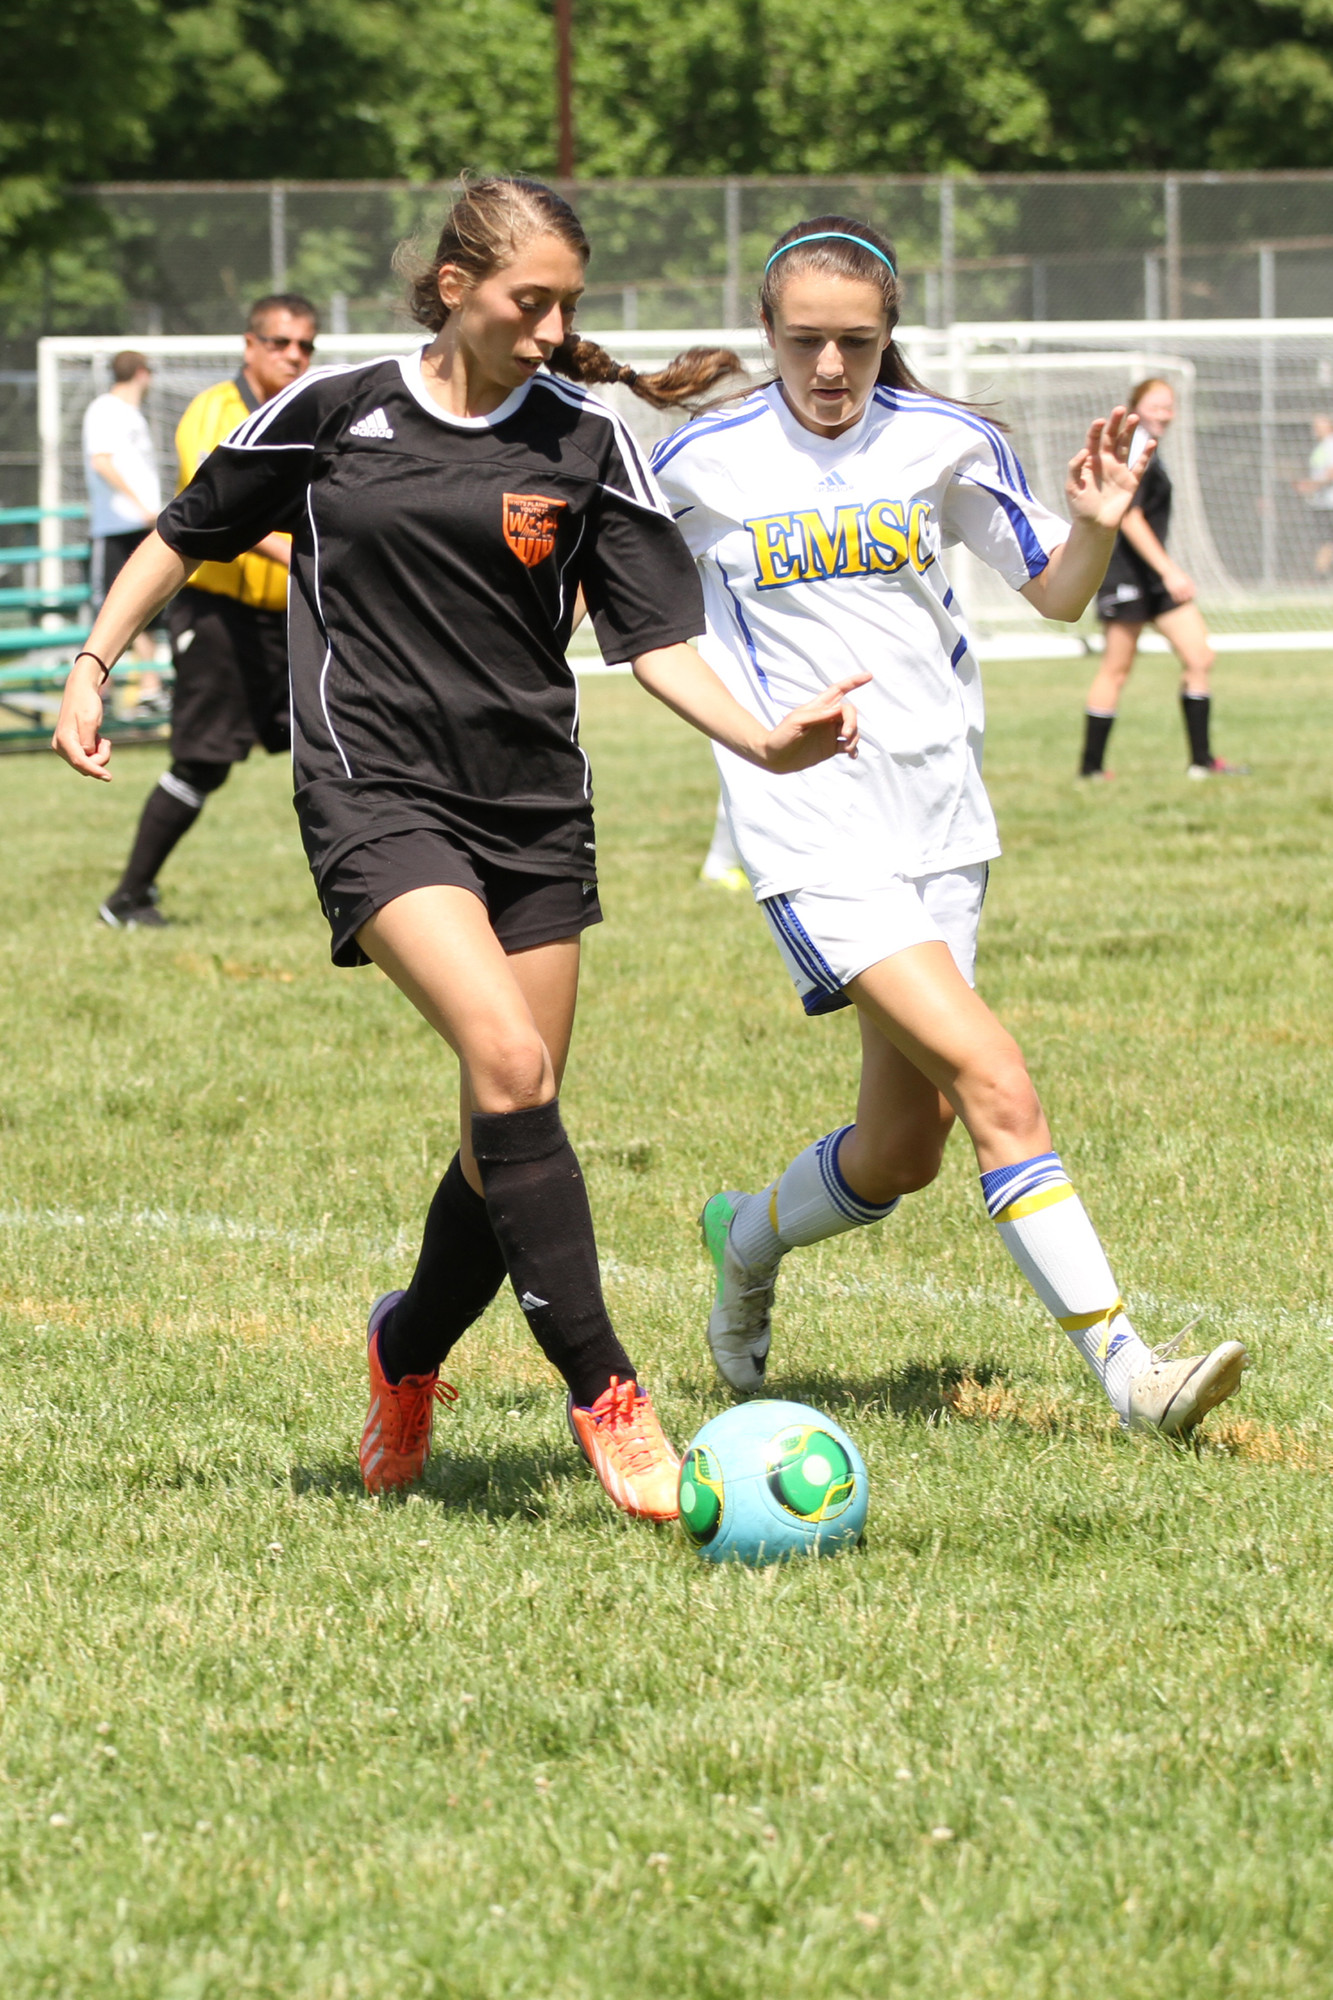 Michaelyn Benson, left, tried to stave off defender Alexis Rondinelli.